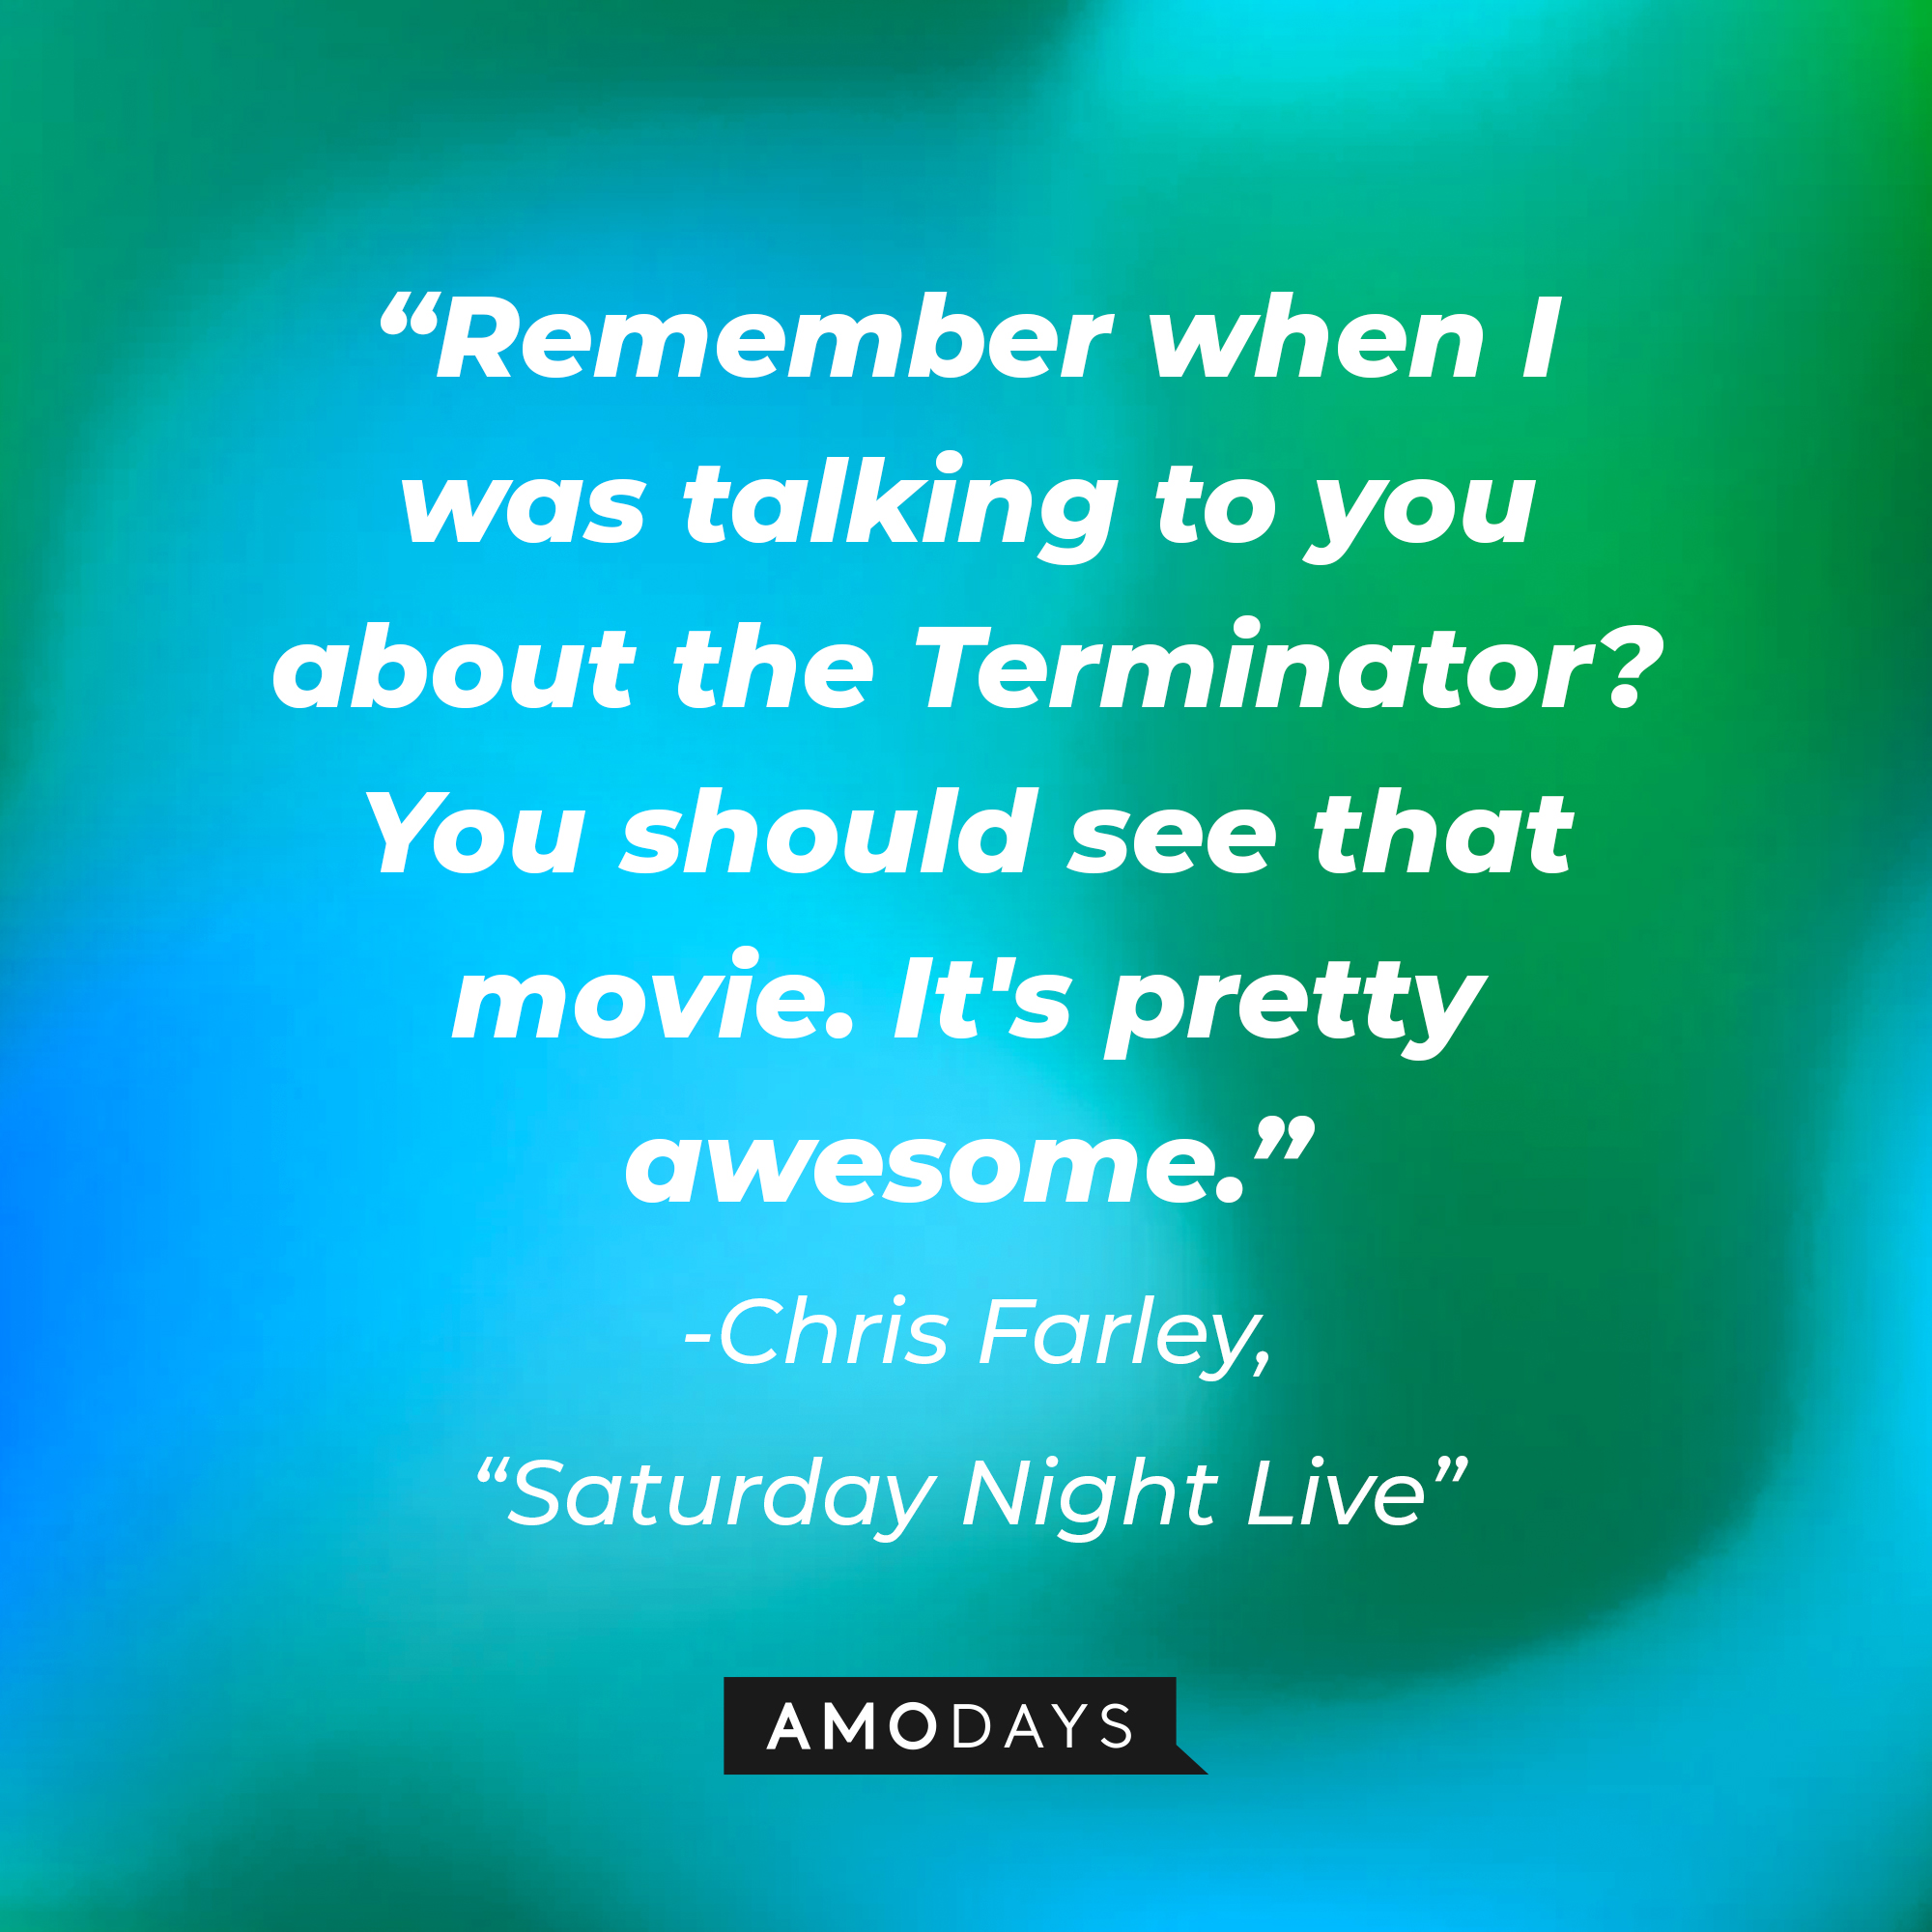 Chris Farley's "Saturday Night Live" quote: "Remember when I was talking to you about the Terminator? You should see that movie. It's pretty awesome." | Source: Amodays